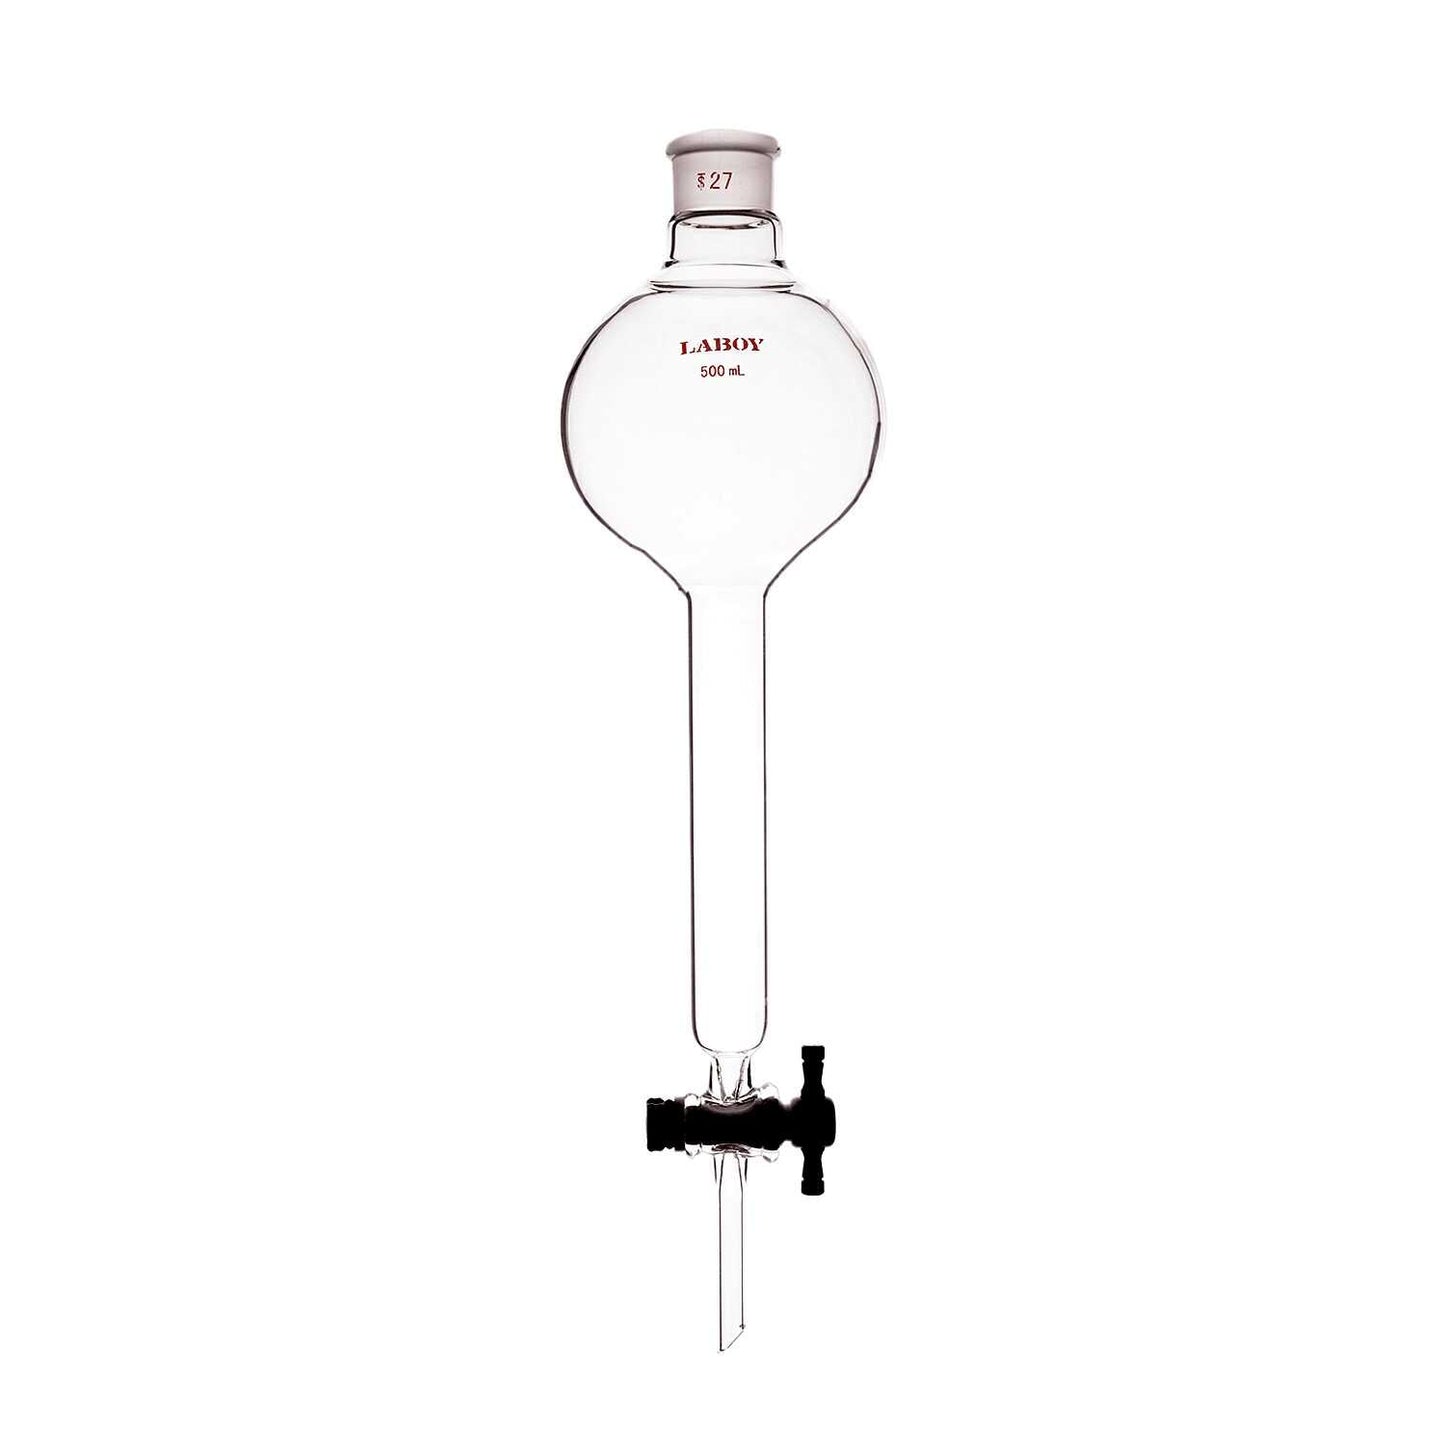 Laboy Glass Globe Shaped Separatory Funnel with PTFE Stopcock for Liquid-Liquid Extractions - Scienmart